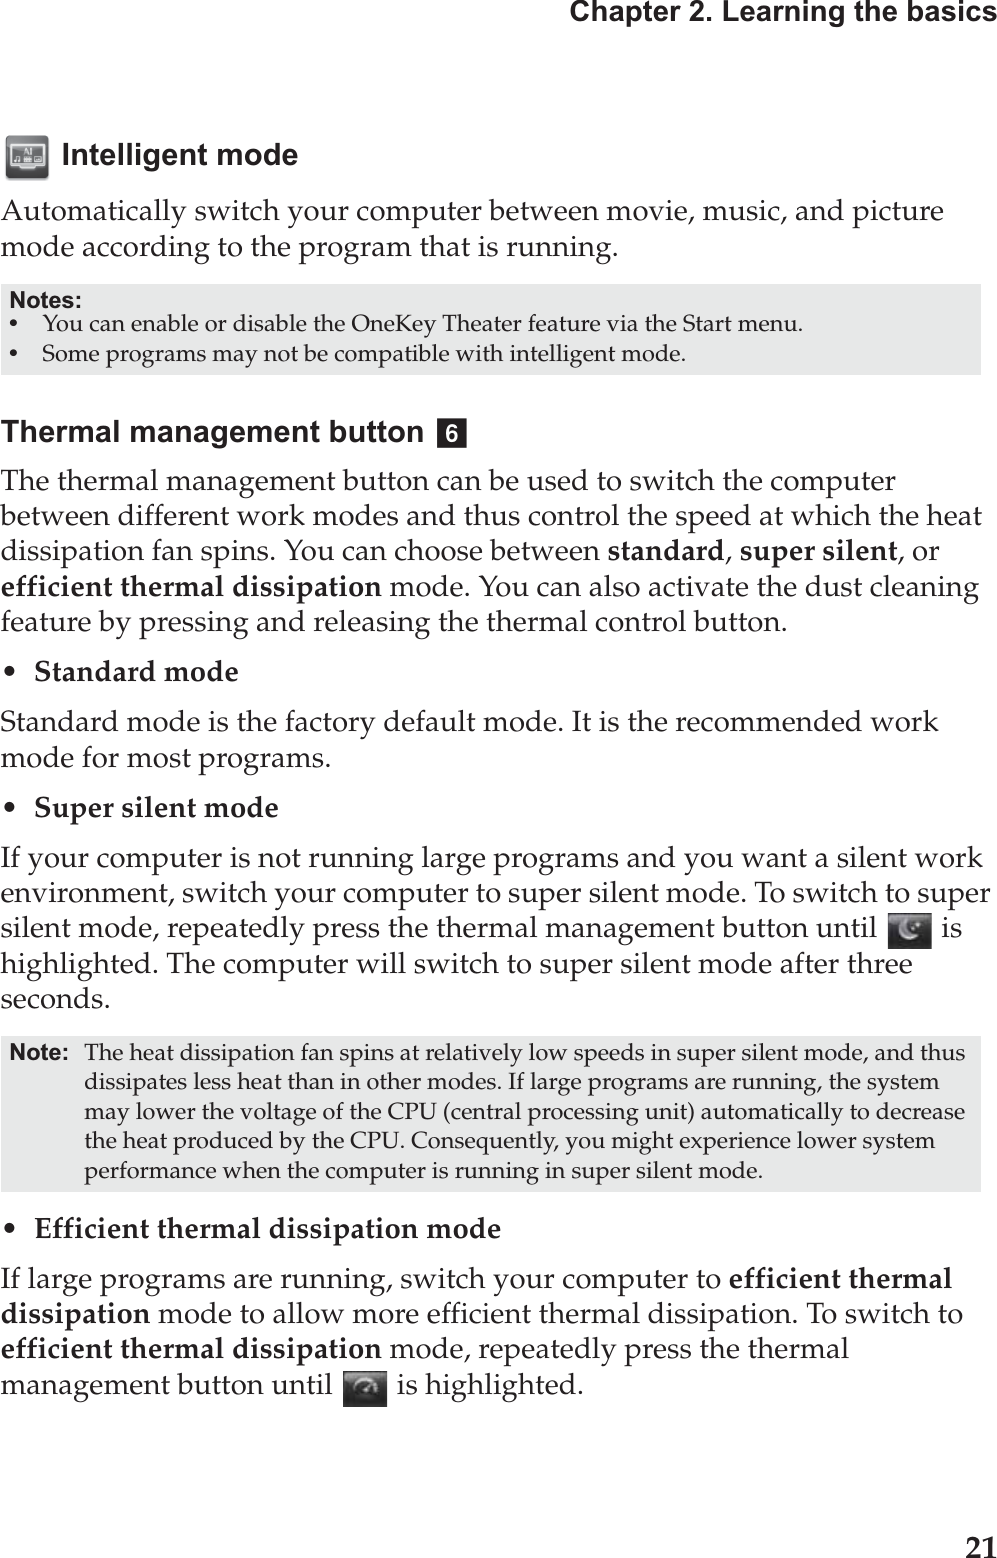 Chapter 2. Learning the basics21 Intelligent modeAutomatically switch your computer between movie, music, and picture mode according to the program that is running. Thermal management buttonThe thermal management button can be used to switch the computer between different work modes and thus control the speed at which the heat dissipation fan spins. You can choose between standard, super silent, or efficient thermal dissipation mode. You can also activate the dust cleaning feature by pressing and releasing the thermal control button.• Standard modeStandard mode is the factory default mode. It is the recommended work mode for most programs.• Super silent modeIf your computer is not running large programs and you want a silent work environment, switch your computer to super silent mode. To switch to super silent mode, repeatedly press the thermal management button until   is highlighted. The computer will switch to super silent mode after three seconds.• Efficient thermal dissipation modeIf large programs are running, switch your computer to efficient thermal dissipation mode to allow more efficient thermal dissipation. To switch to efficient thermal dissipation mode, repeatedly press the thermal management button until   is highlighted. Notes:•You can enable or disable the OneKey Theater feature via the Start menu.•Some programs may not be compatible with intelligent mode.Note: The heat dissipation fan spins at relatively low speeds in super silent mode, and thus dissipates less heat than in other modes. If large programs are running, the system may lower the voltage of the CPU (central processing unit) automatically to decrease the heat produced by the CPU. Consequently, you might experience lower system performance when the computer is running in super silent mode.f